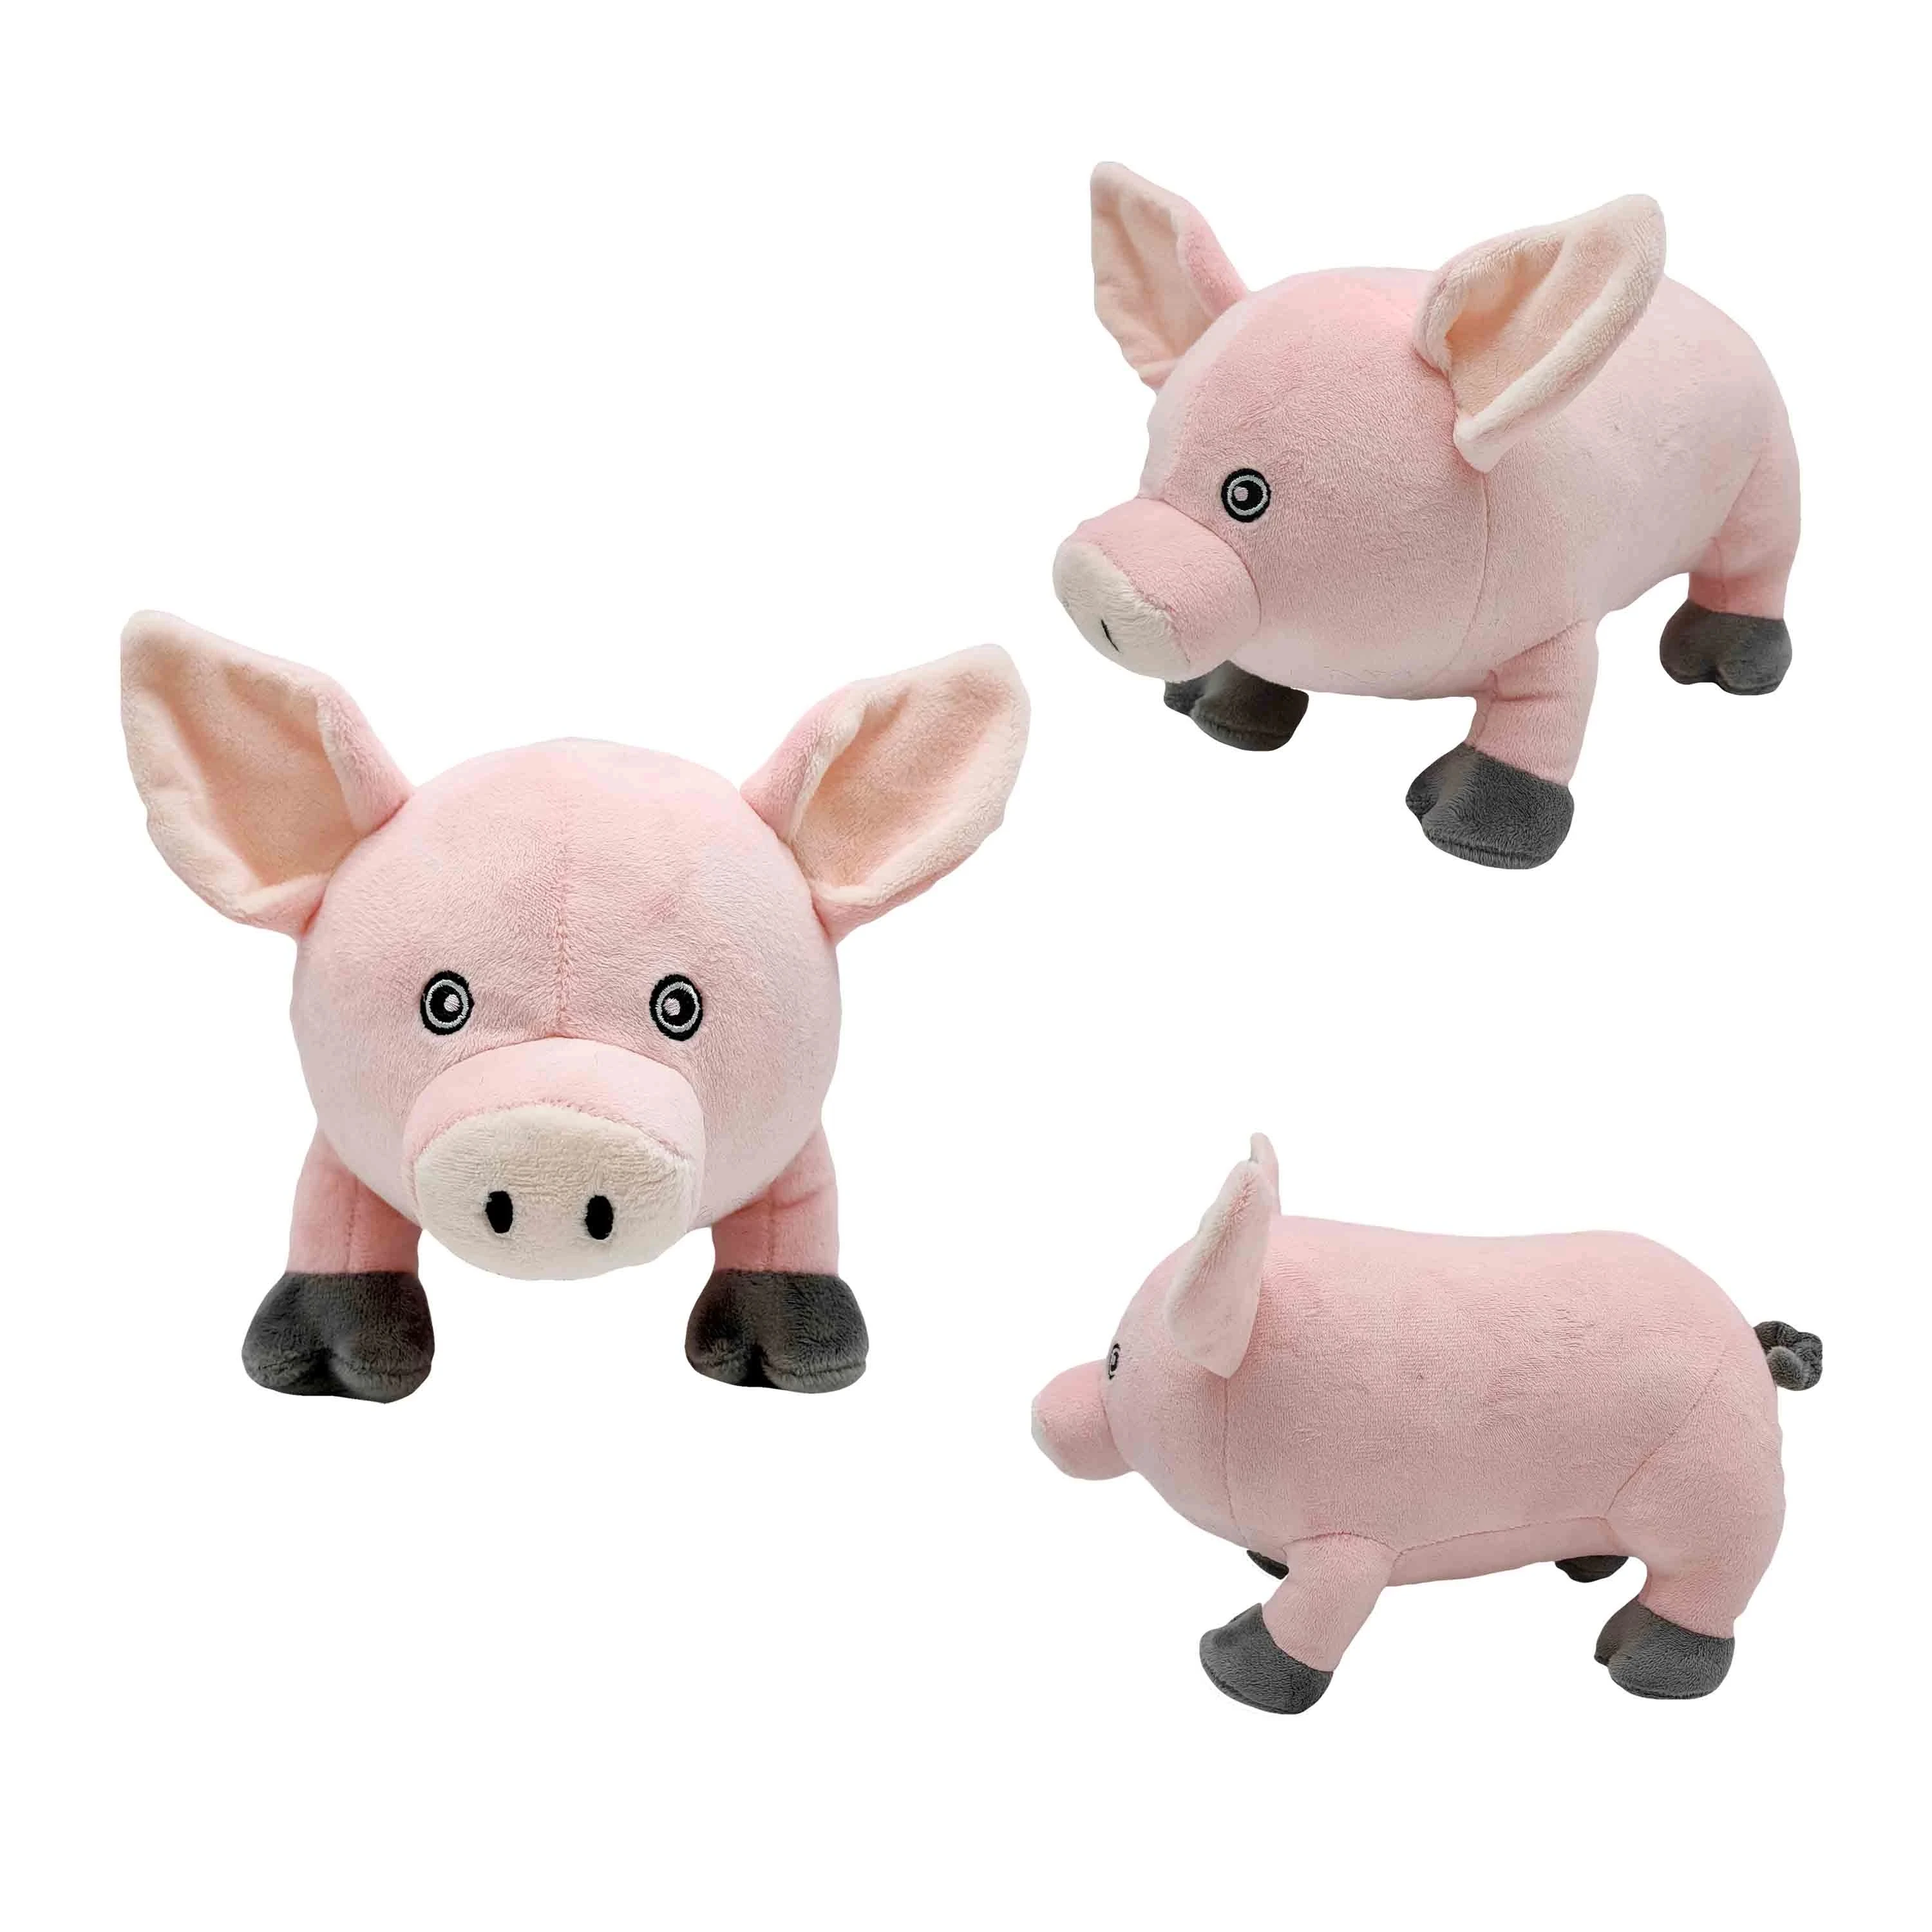 

20CM New Slumberland Pig Pink Plush Toys Around Pigs Holiday Gifts For Boys And Girls Birthday Gifts Home Decoration